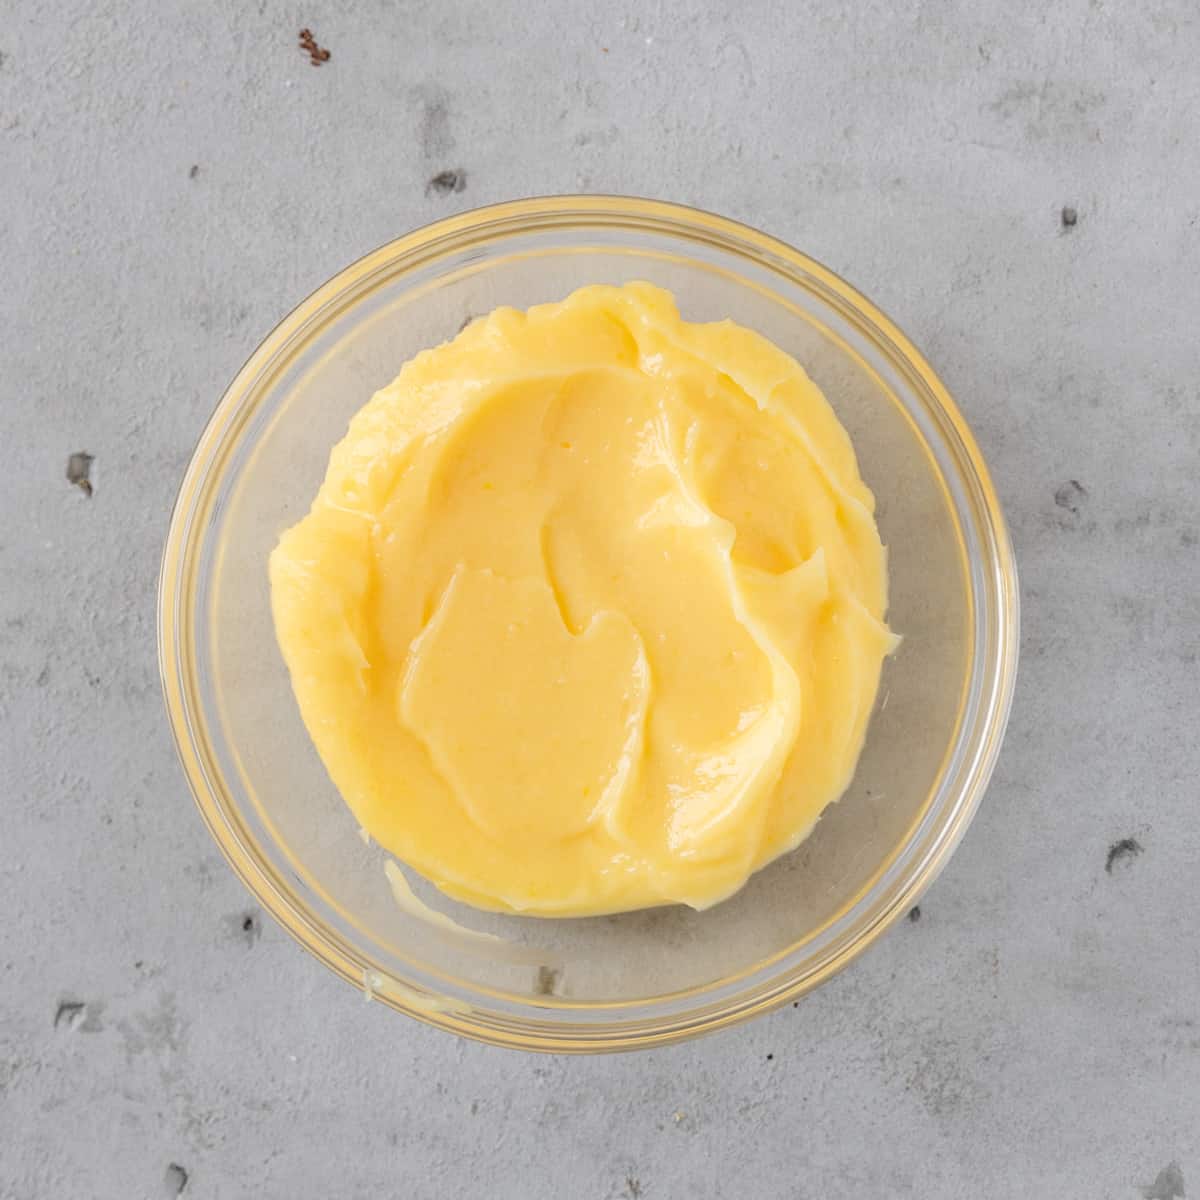 the lemon curd in a glass bowl on a grey background.